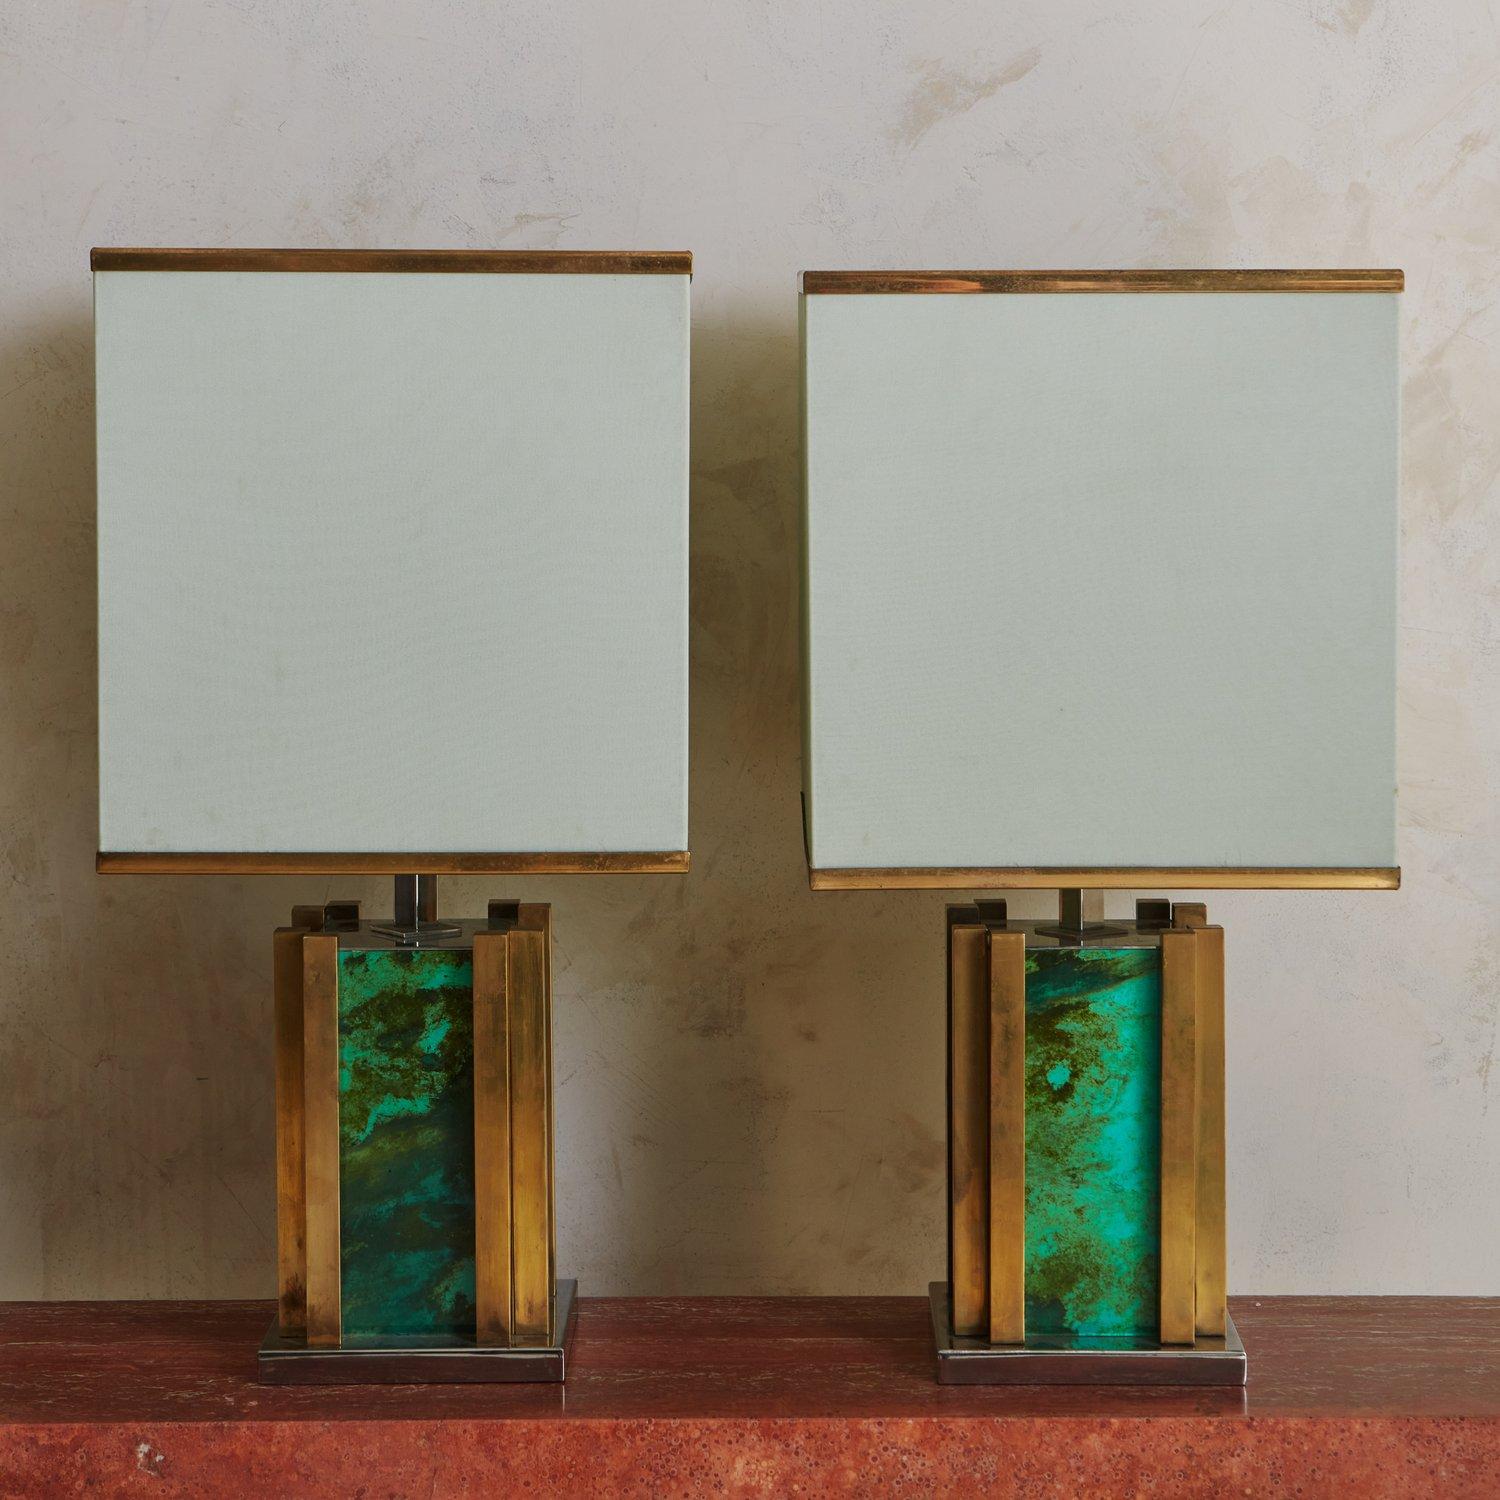 A pair of Mid Century Italian table lamps designed by Romeo Rega. These lamps feature architectural bases constructed with patinated brass and glass with a captivating green marbled effect. They have square chrome platforms and retain their original